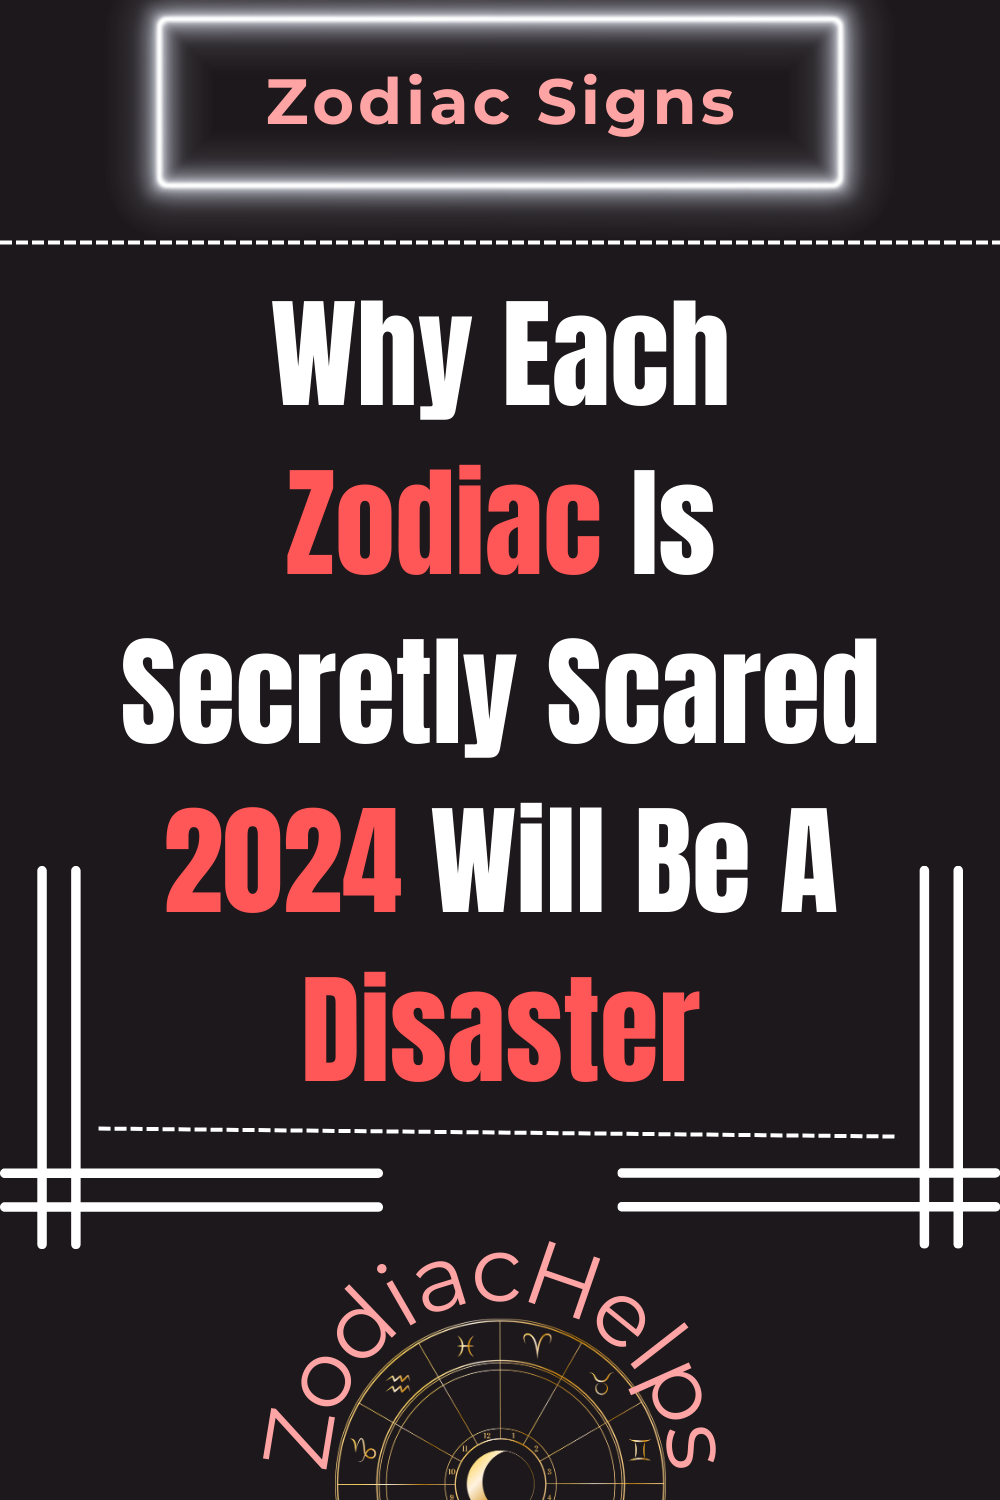 Why Each Zodiac Is Secretly Scared 2024 Will Be A Disaster